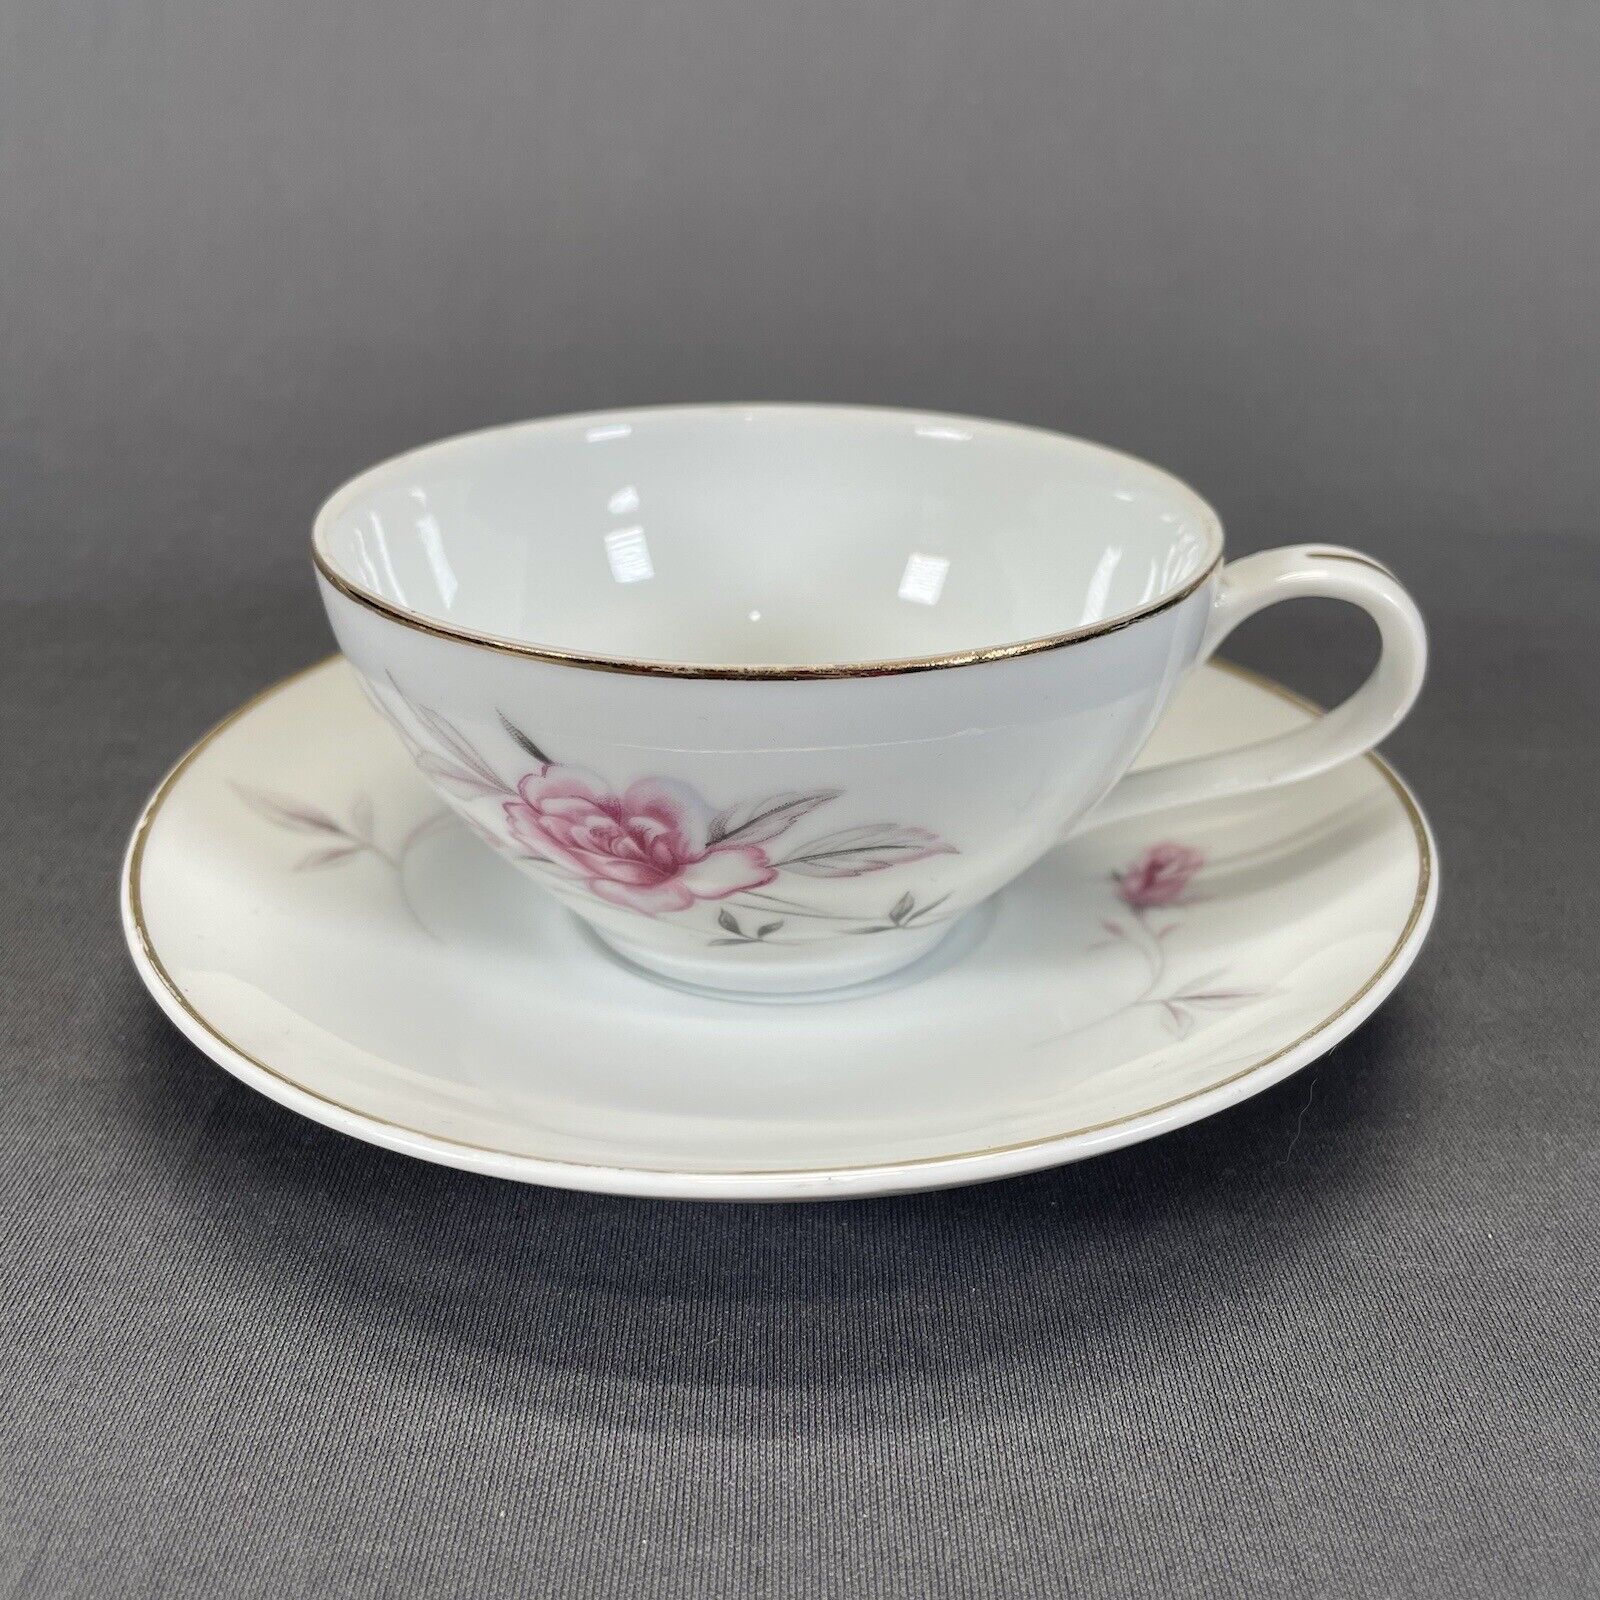 Vintage Nasco Rose Arbor Tea Cup and Saucer Pink Rose Gray Leaves